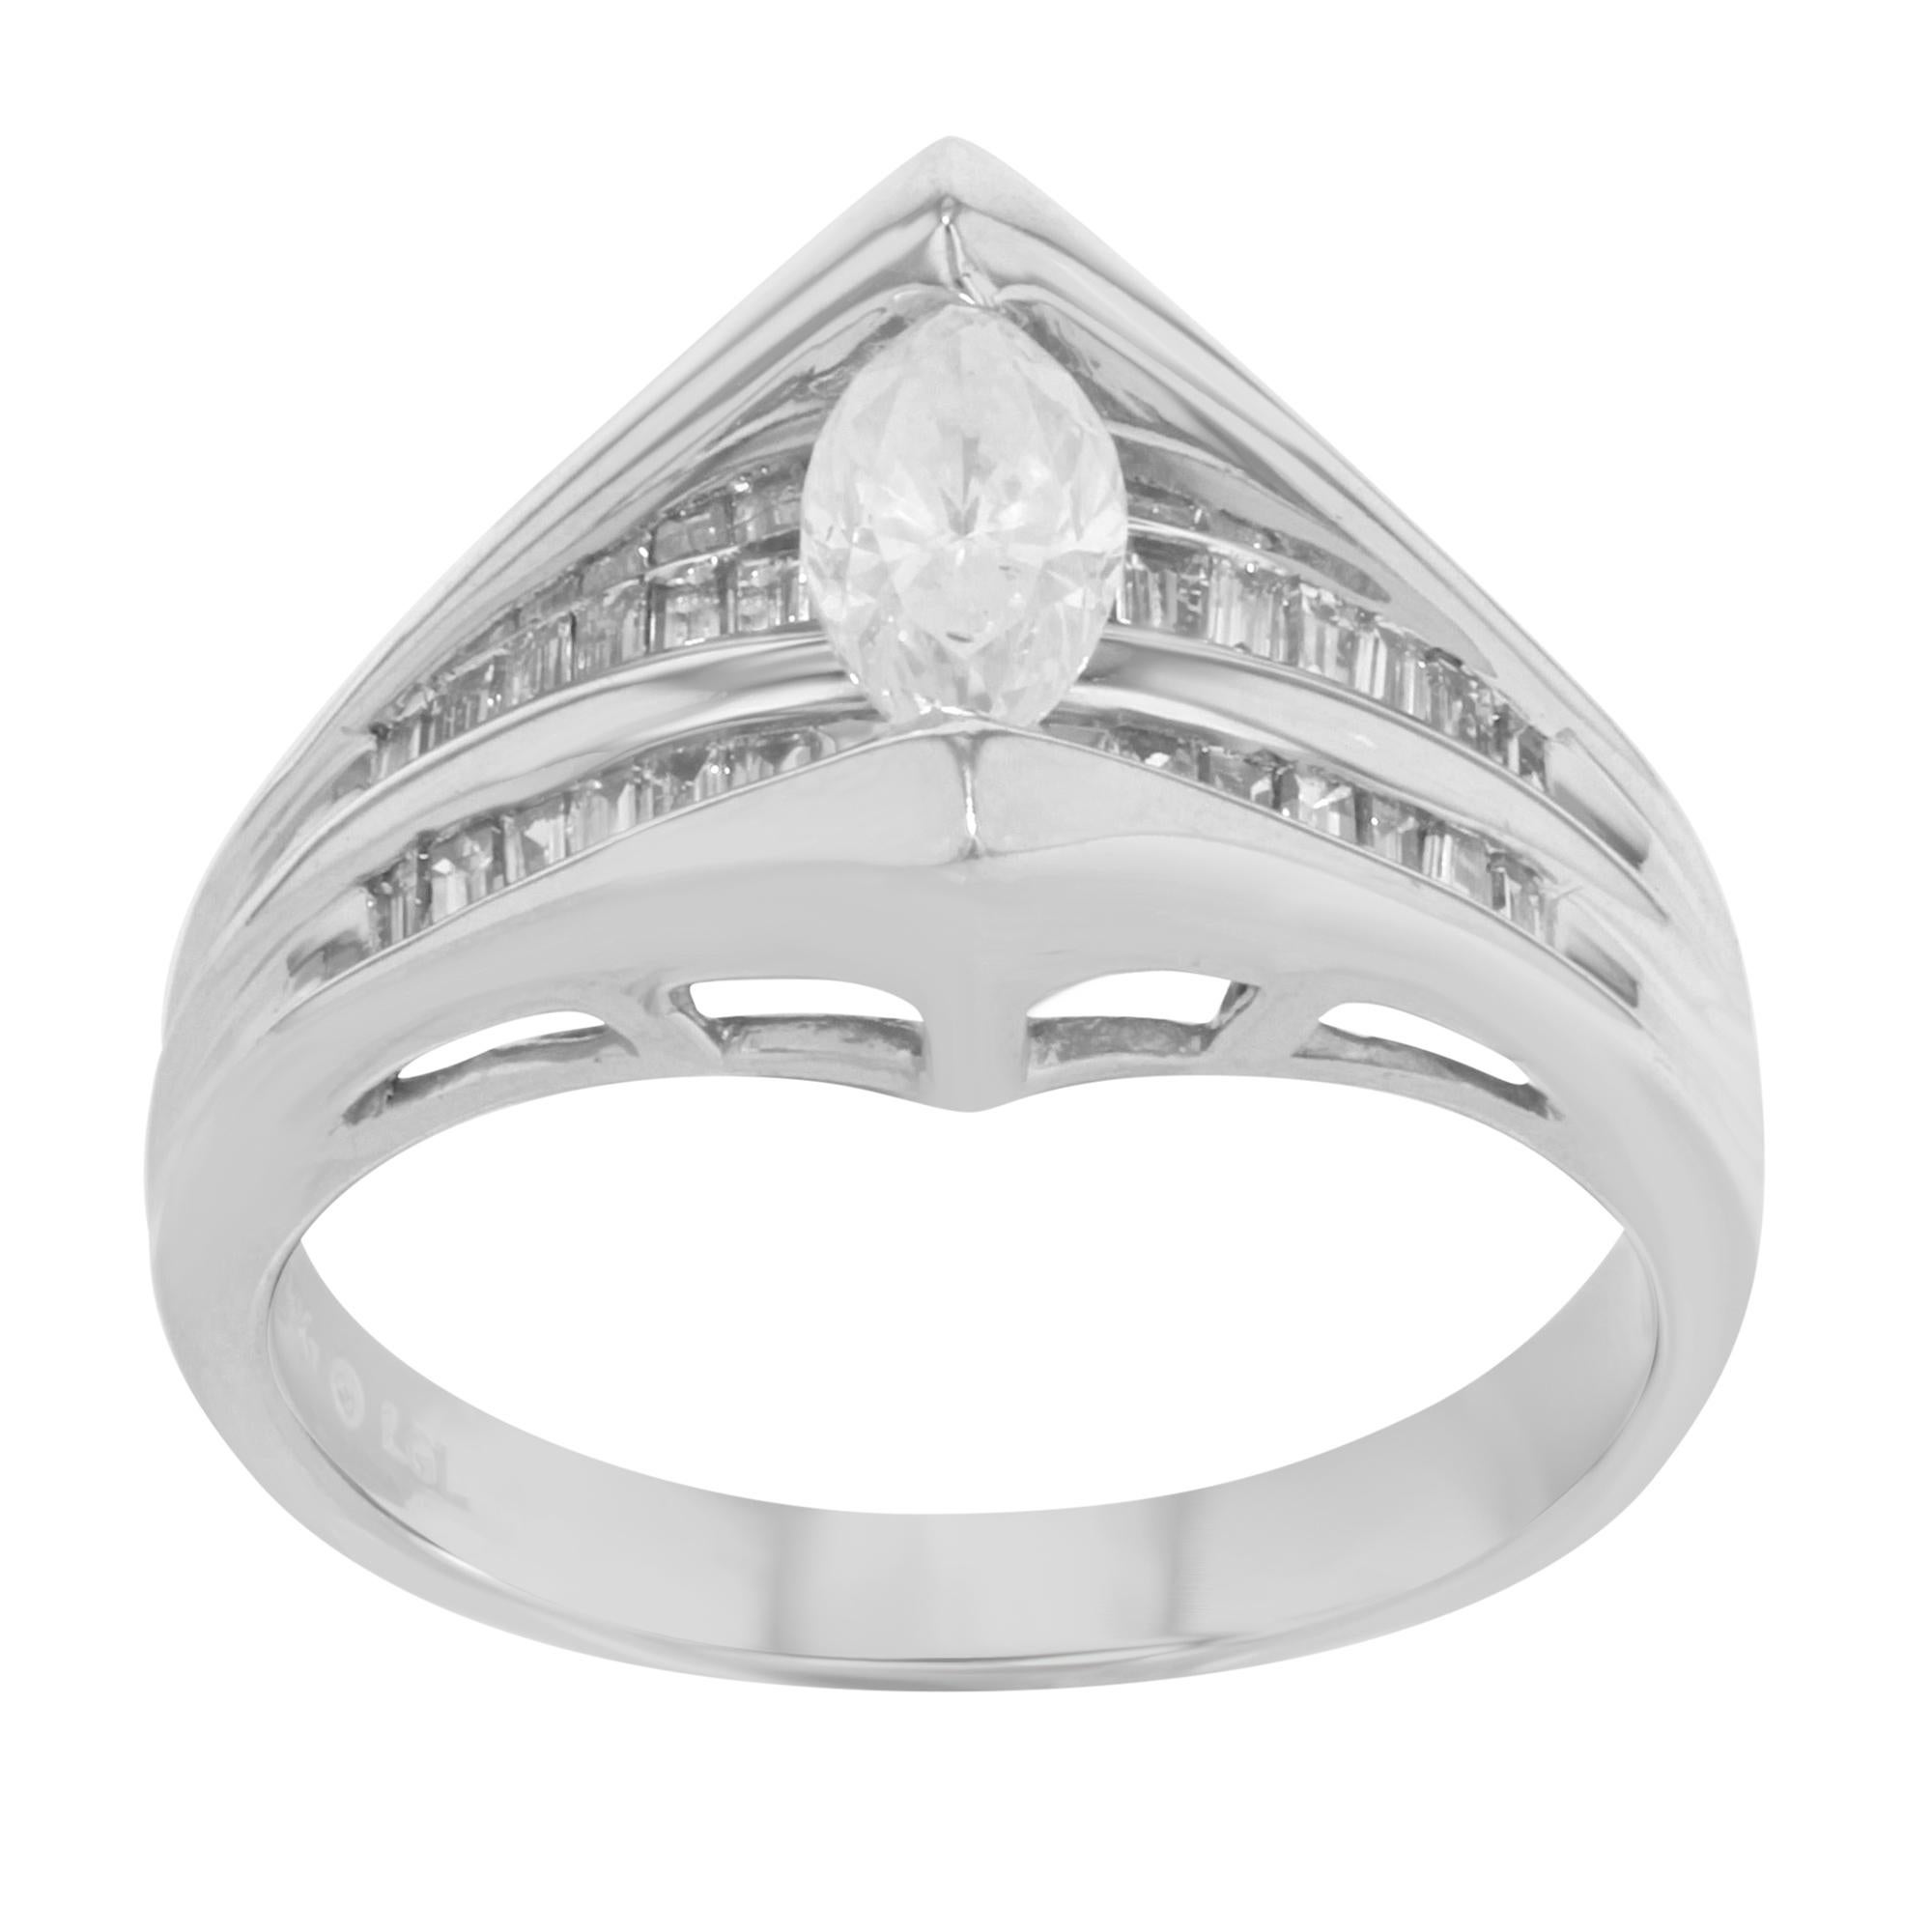 This beautiful ring is crafted in 14K white gold. It features a center marquise cut cloudy diamond accented with channel set baguette cut white diamonds. Total diamond weight 1.25 Cttw. Ring size 7. Total weight: 5.8 gms. Comes with a gift box and